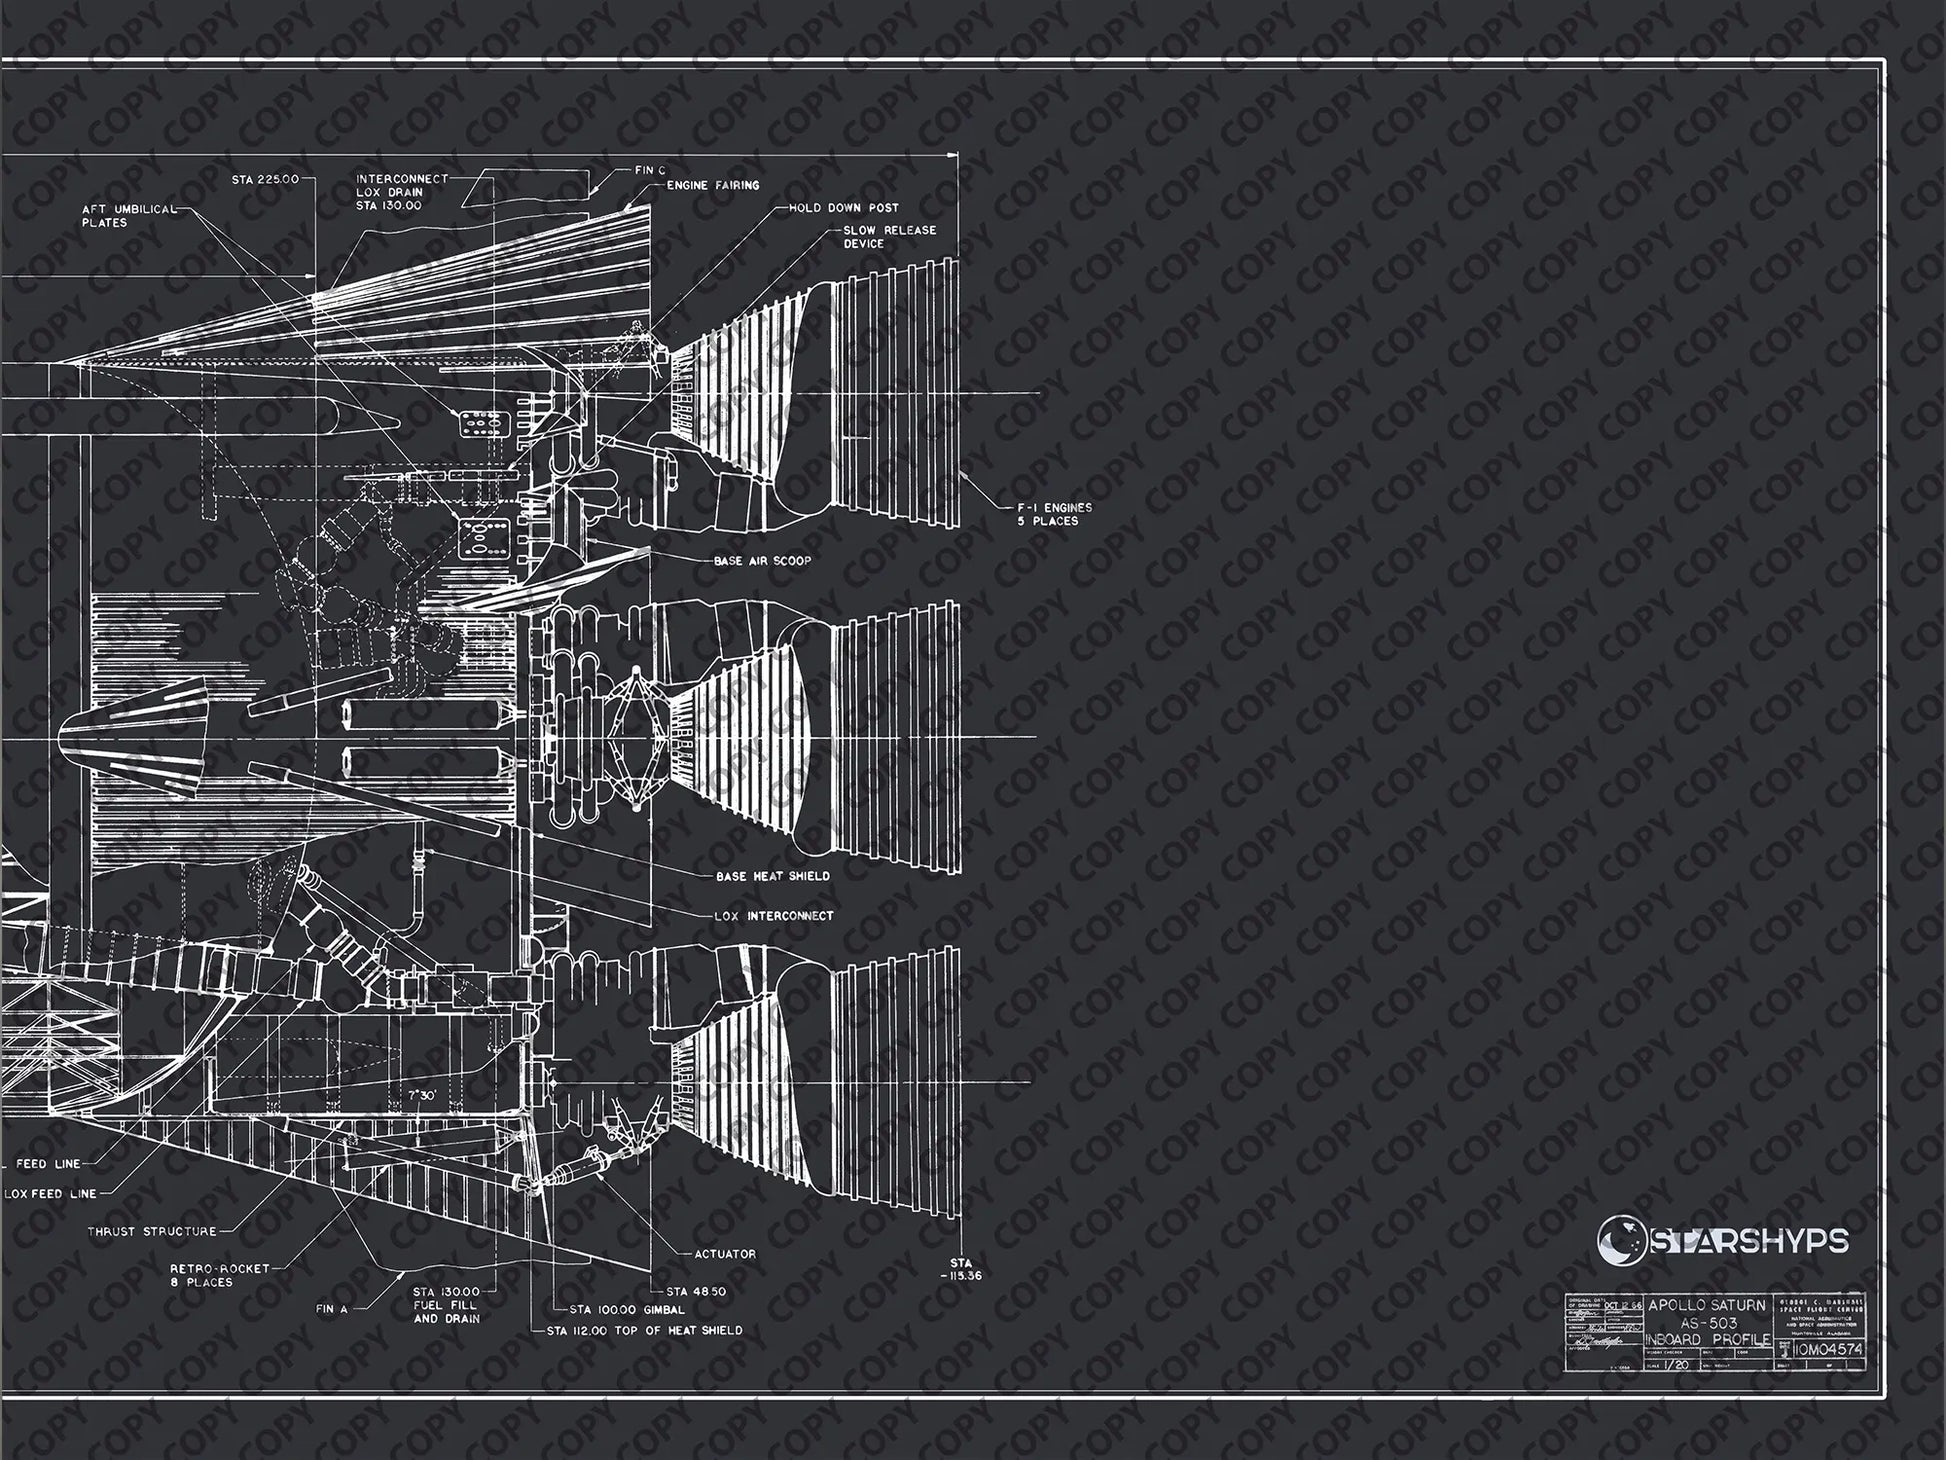 Apollo Saturn V | Rocket Blueprint Posters | Technical Diagram | NASA | A detailed section of the NASA Saturn V rocket blueprint, showing technical schematics with various labeled components including the F-1 engines, engine fairing, and base heat shield against a dark background.